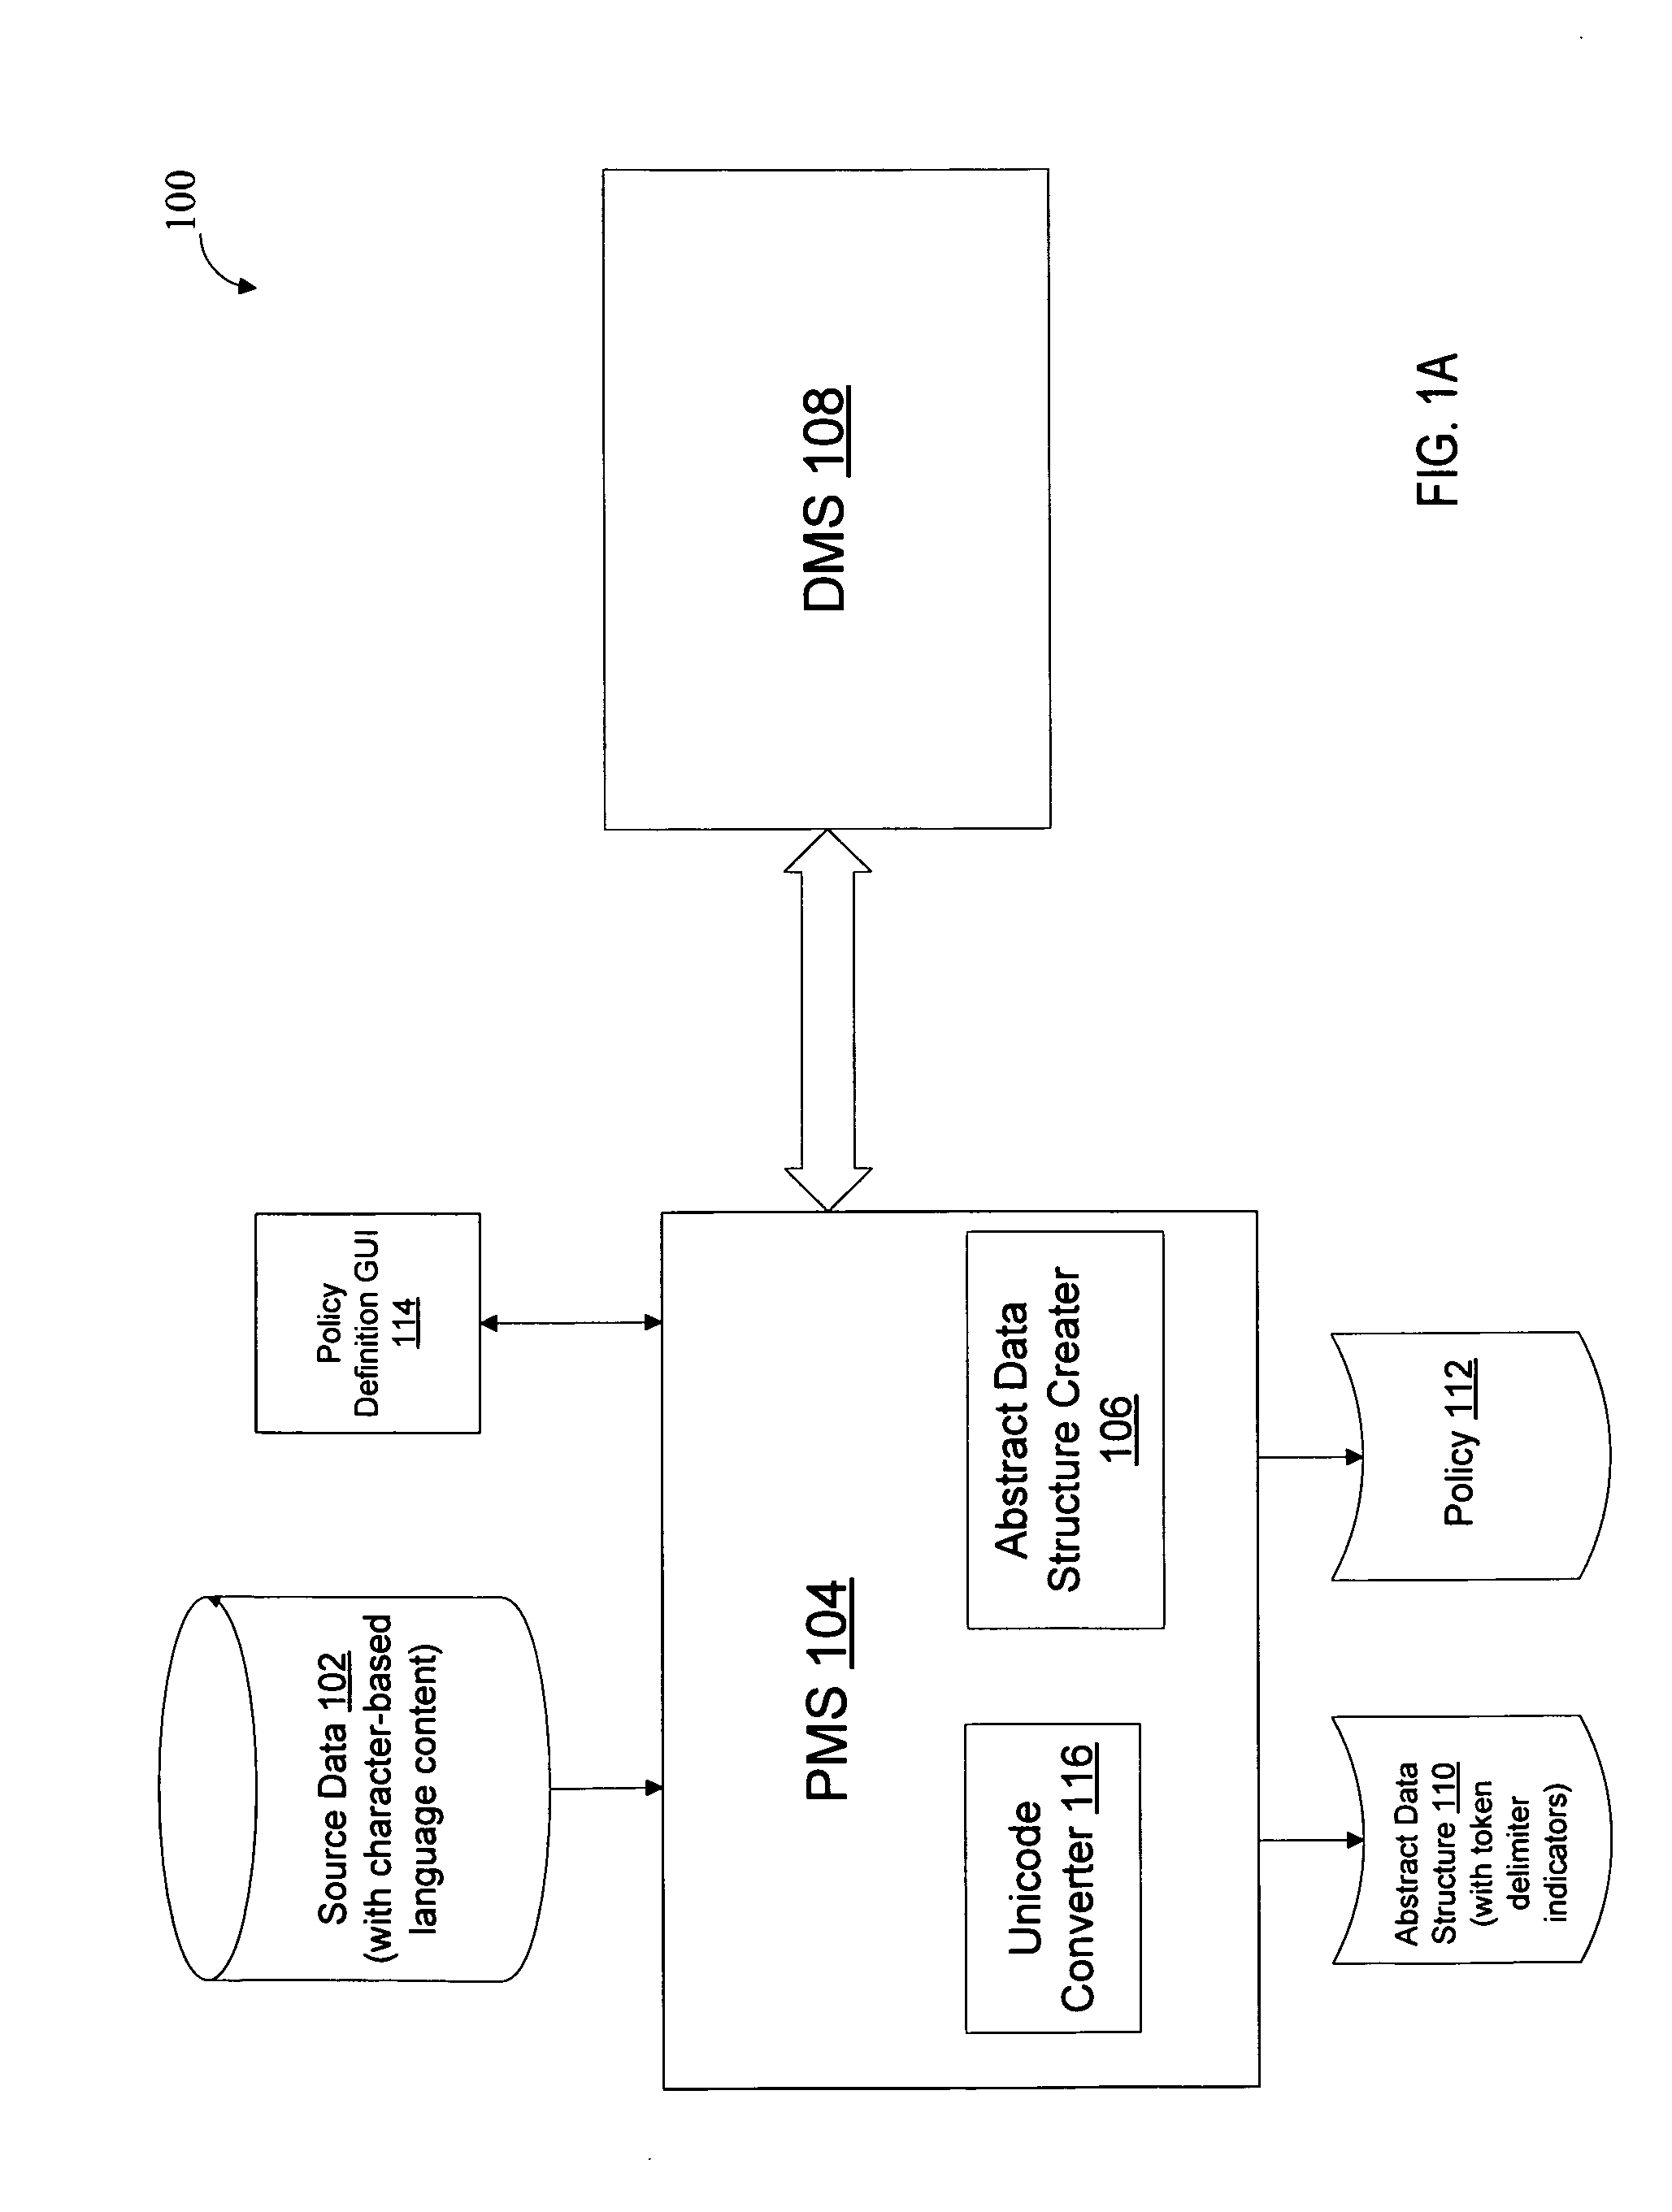 Detecting policy violations in information content containing data in a character-based language